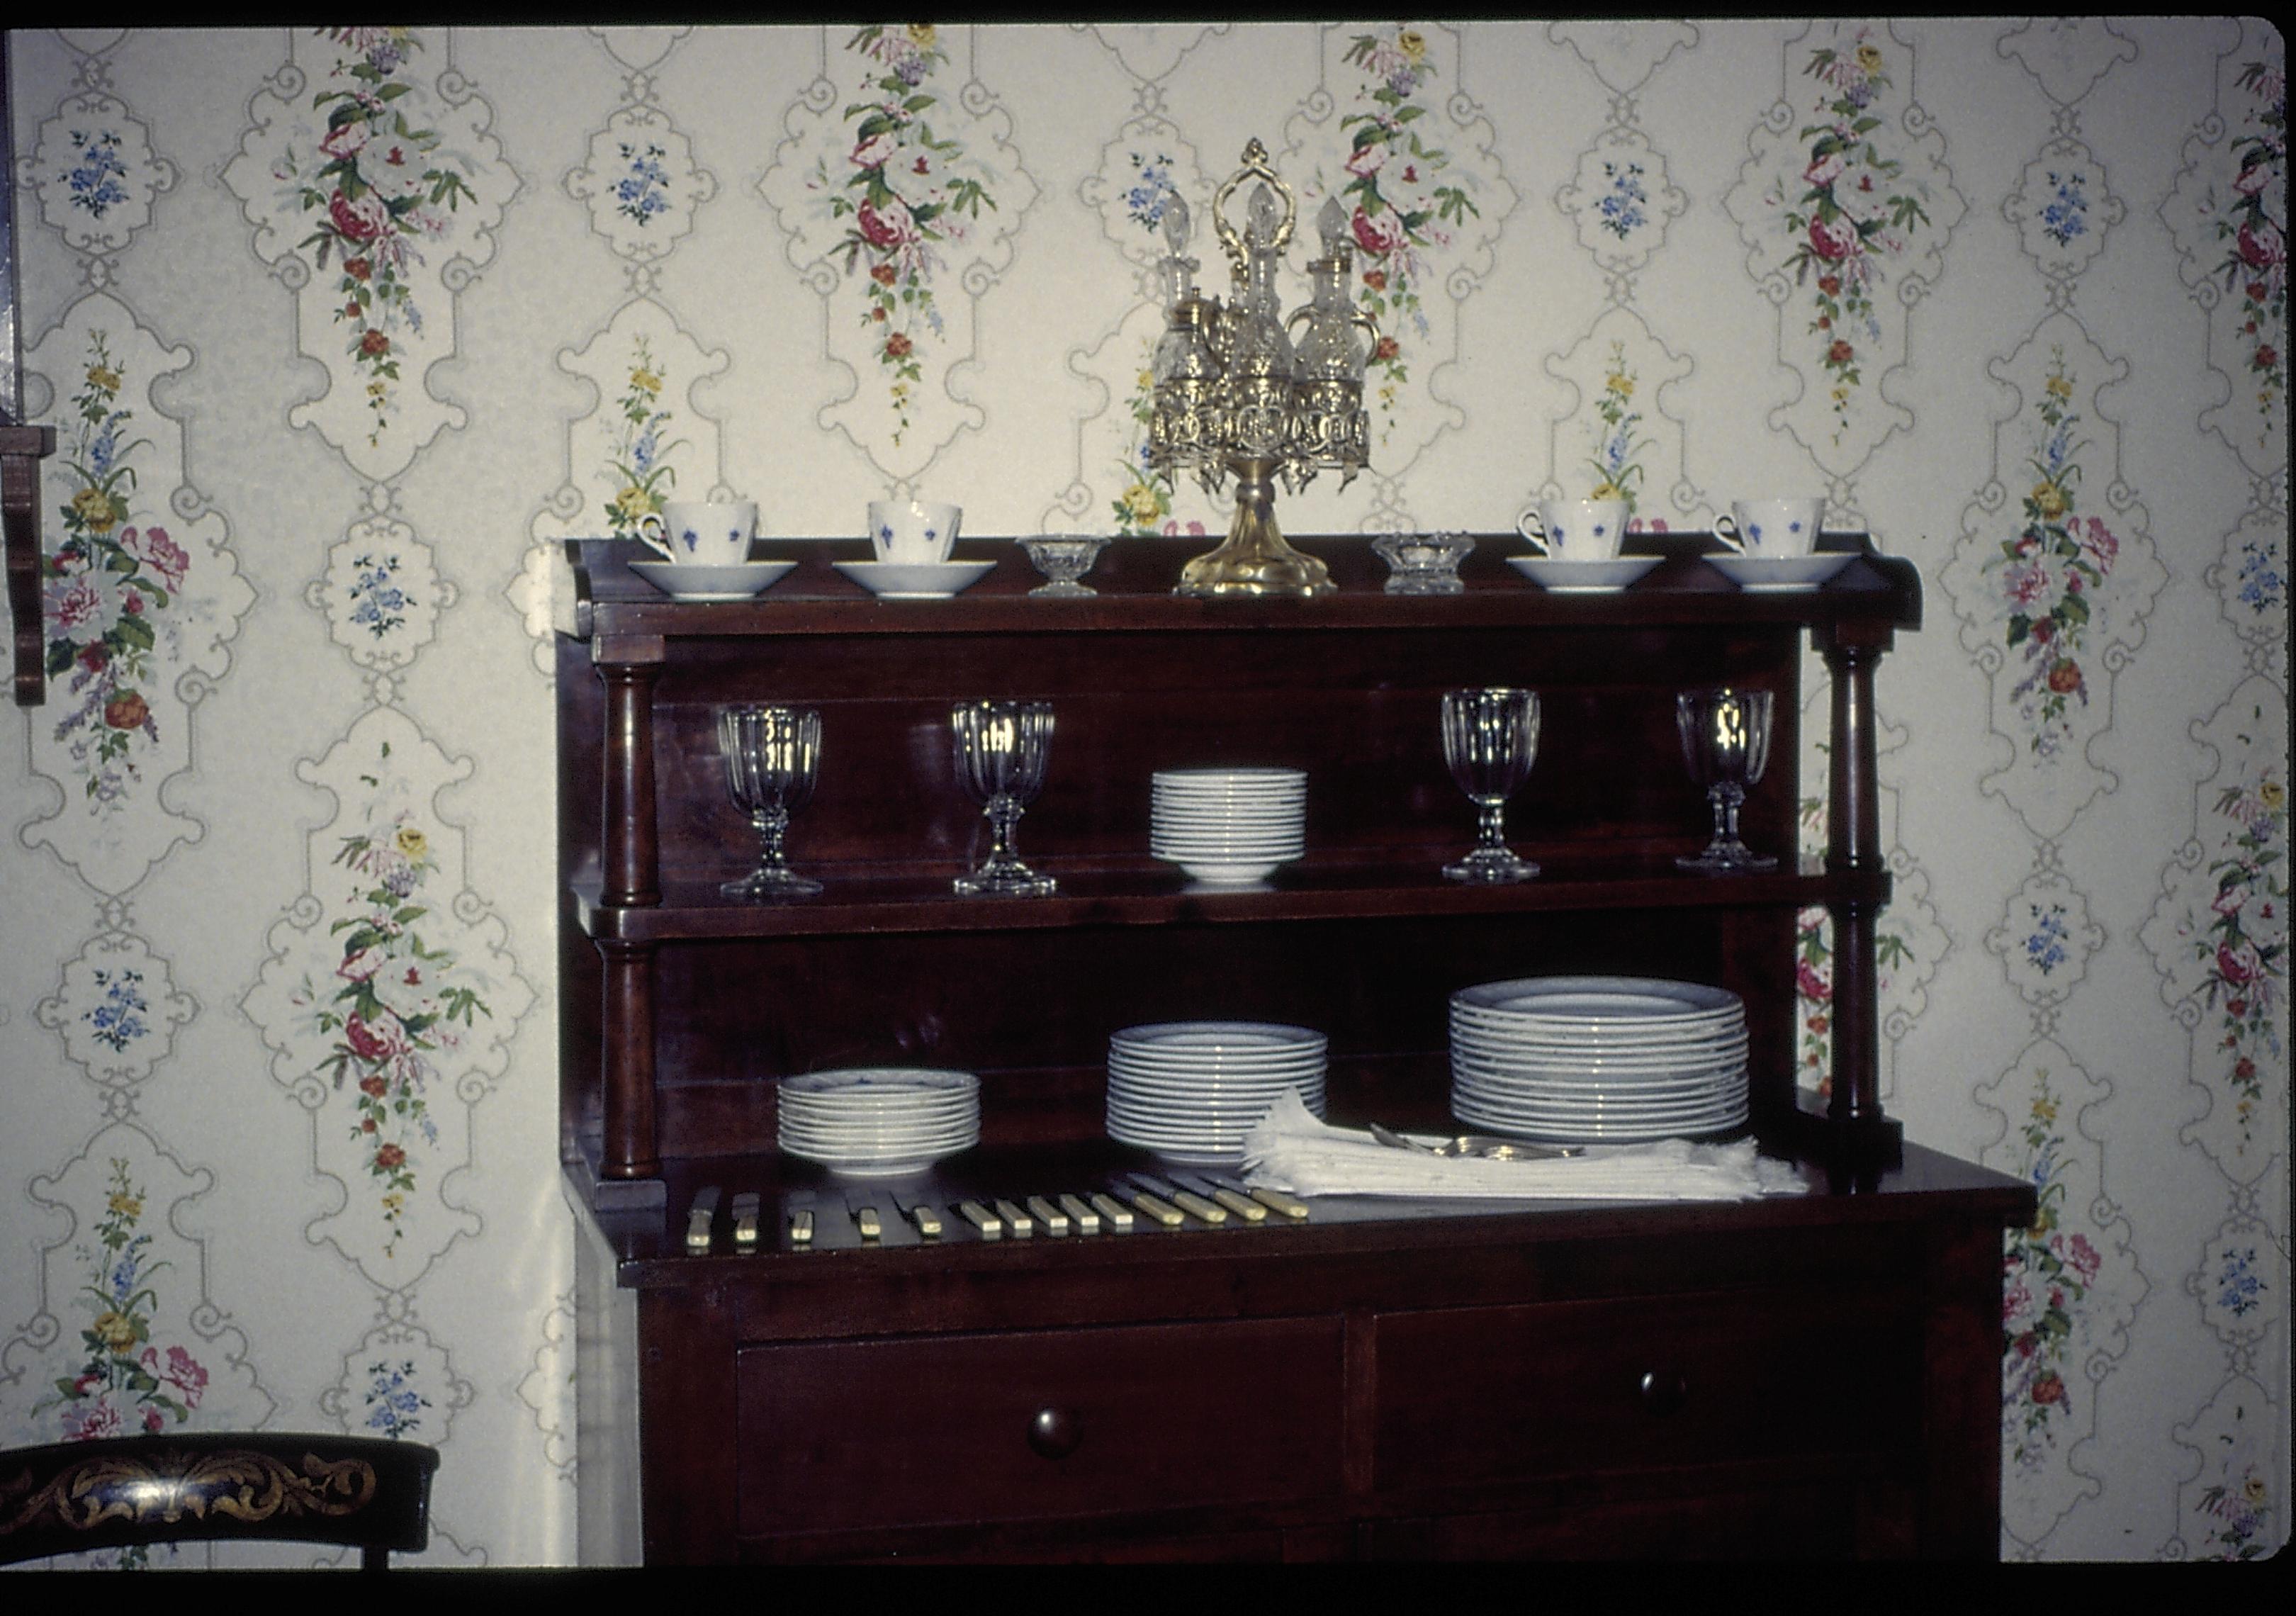 Sideboard in dining room. Lincoln Home NHS- Christmas in Lincoln Home 1997, HS-20 Film Roll #17 Christmas, decorations